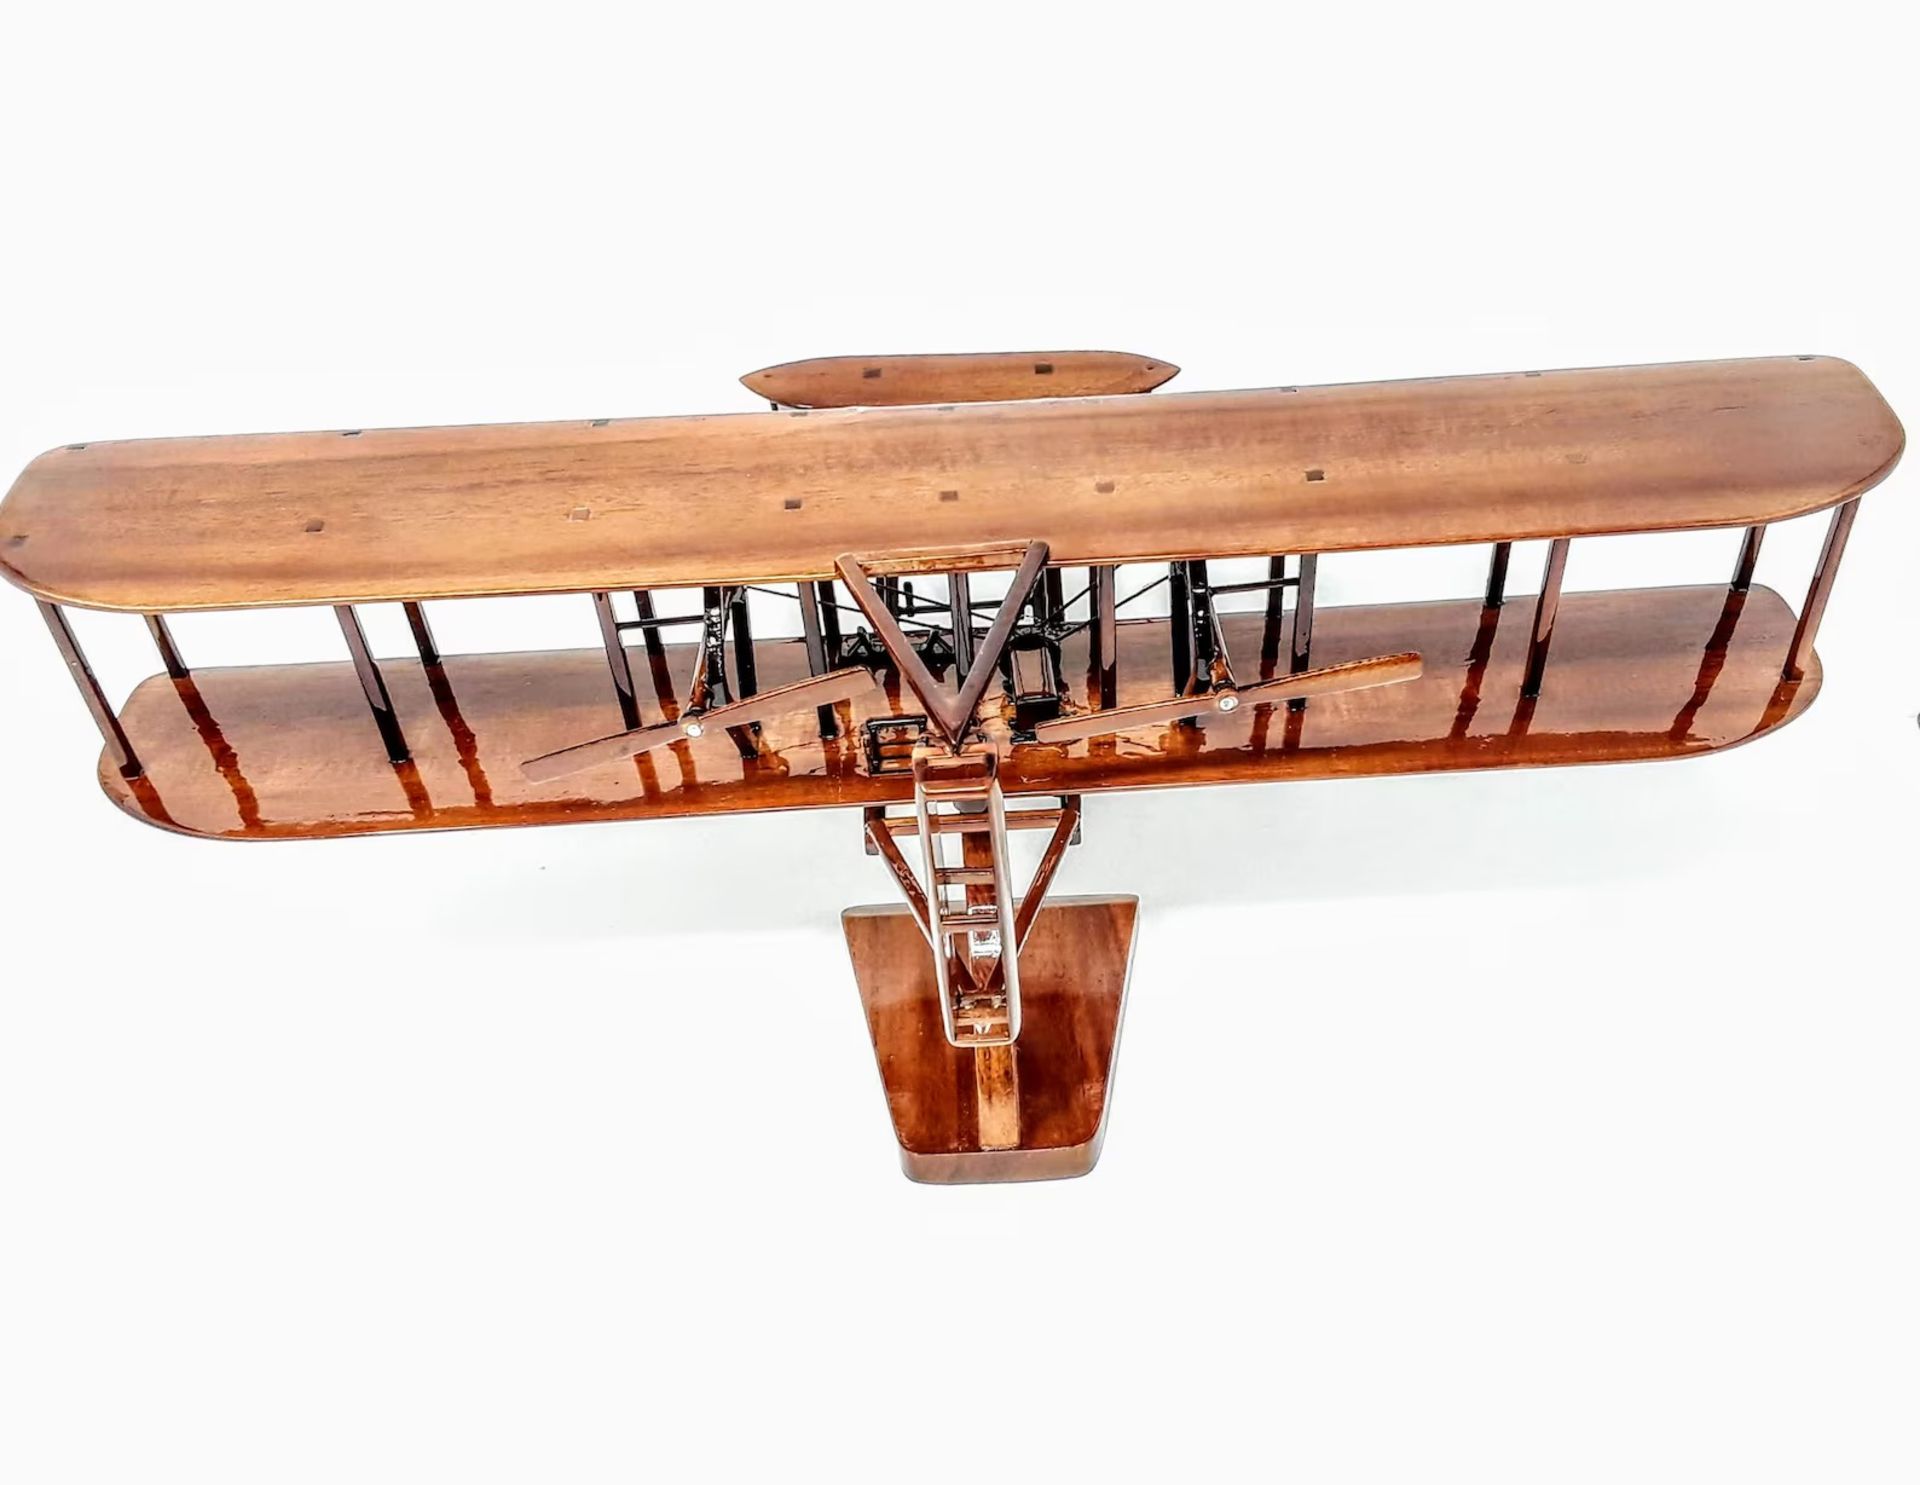 Wright Flyer Wooden Scale Desk Display - Image 3 of 3